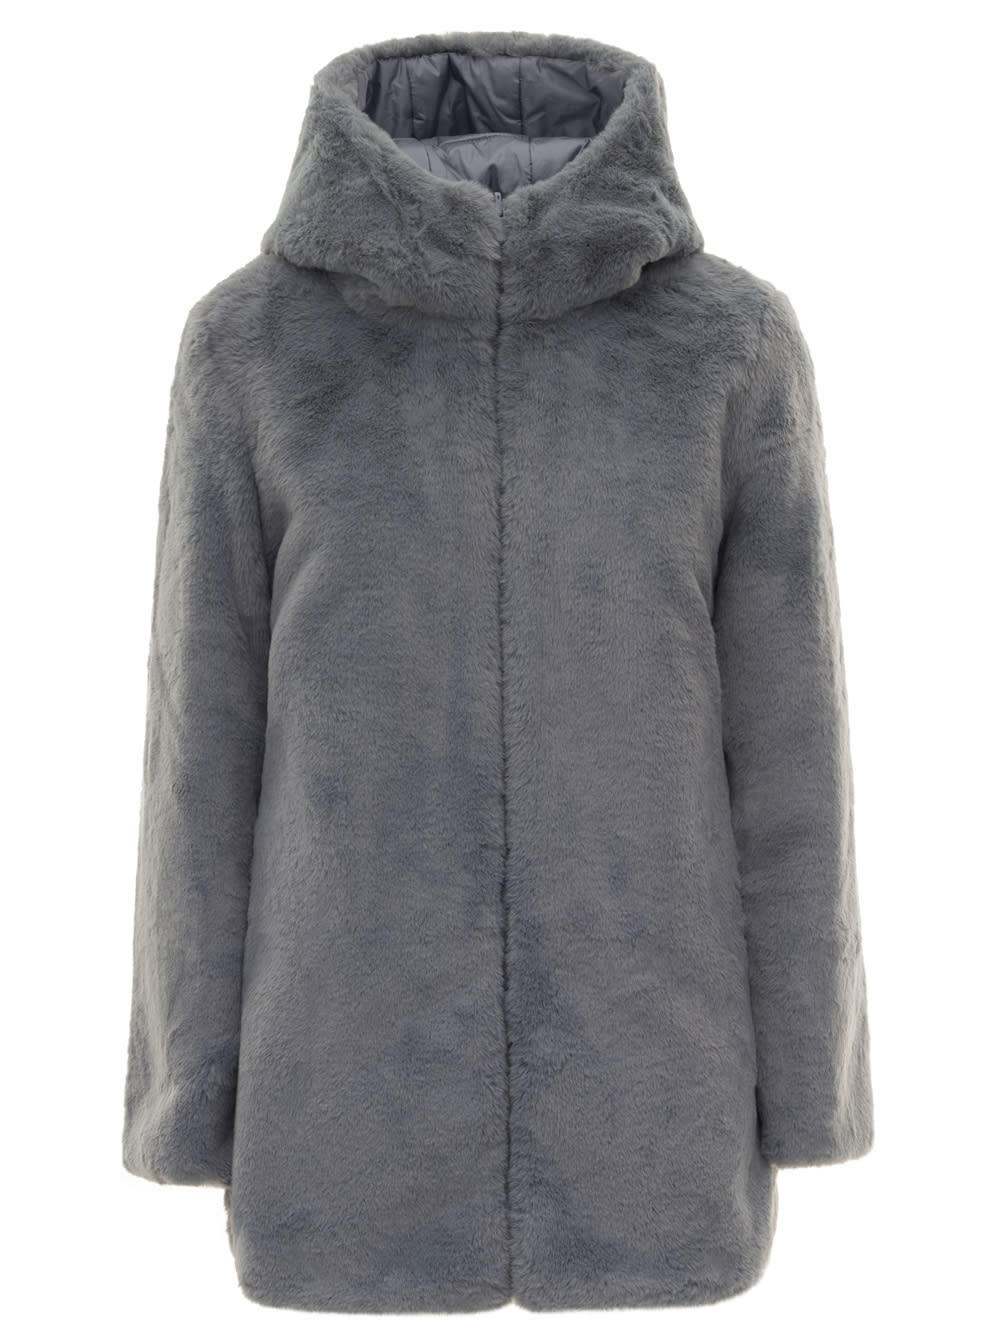 Blue Bridget Reversible Eco Fur Coat With Reversible Side In Quilted Padding Nylon Padded Save The Duck Woman